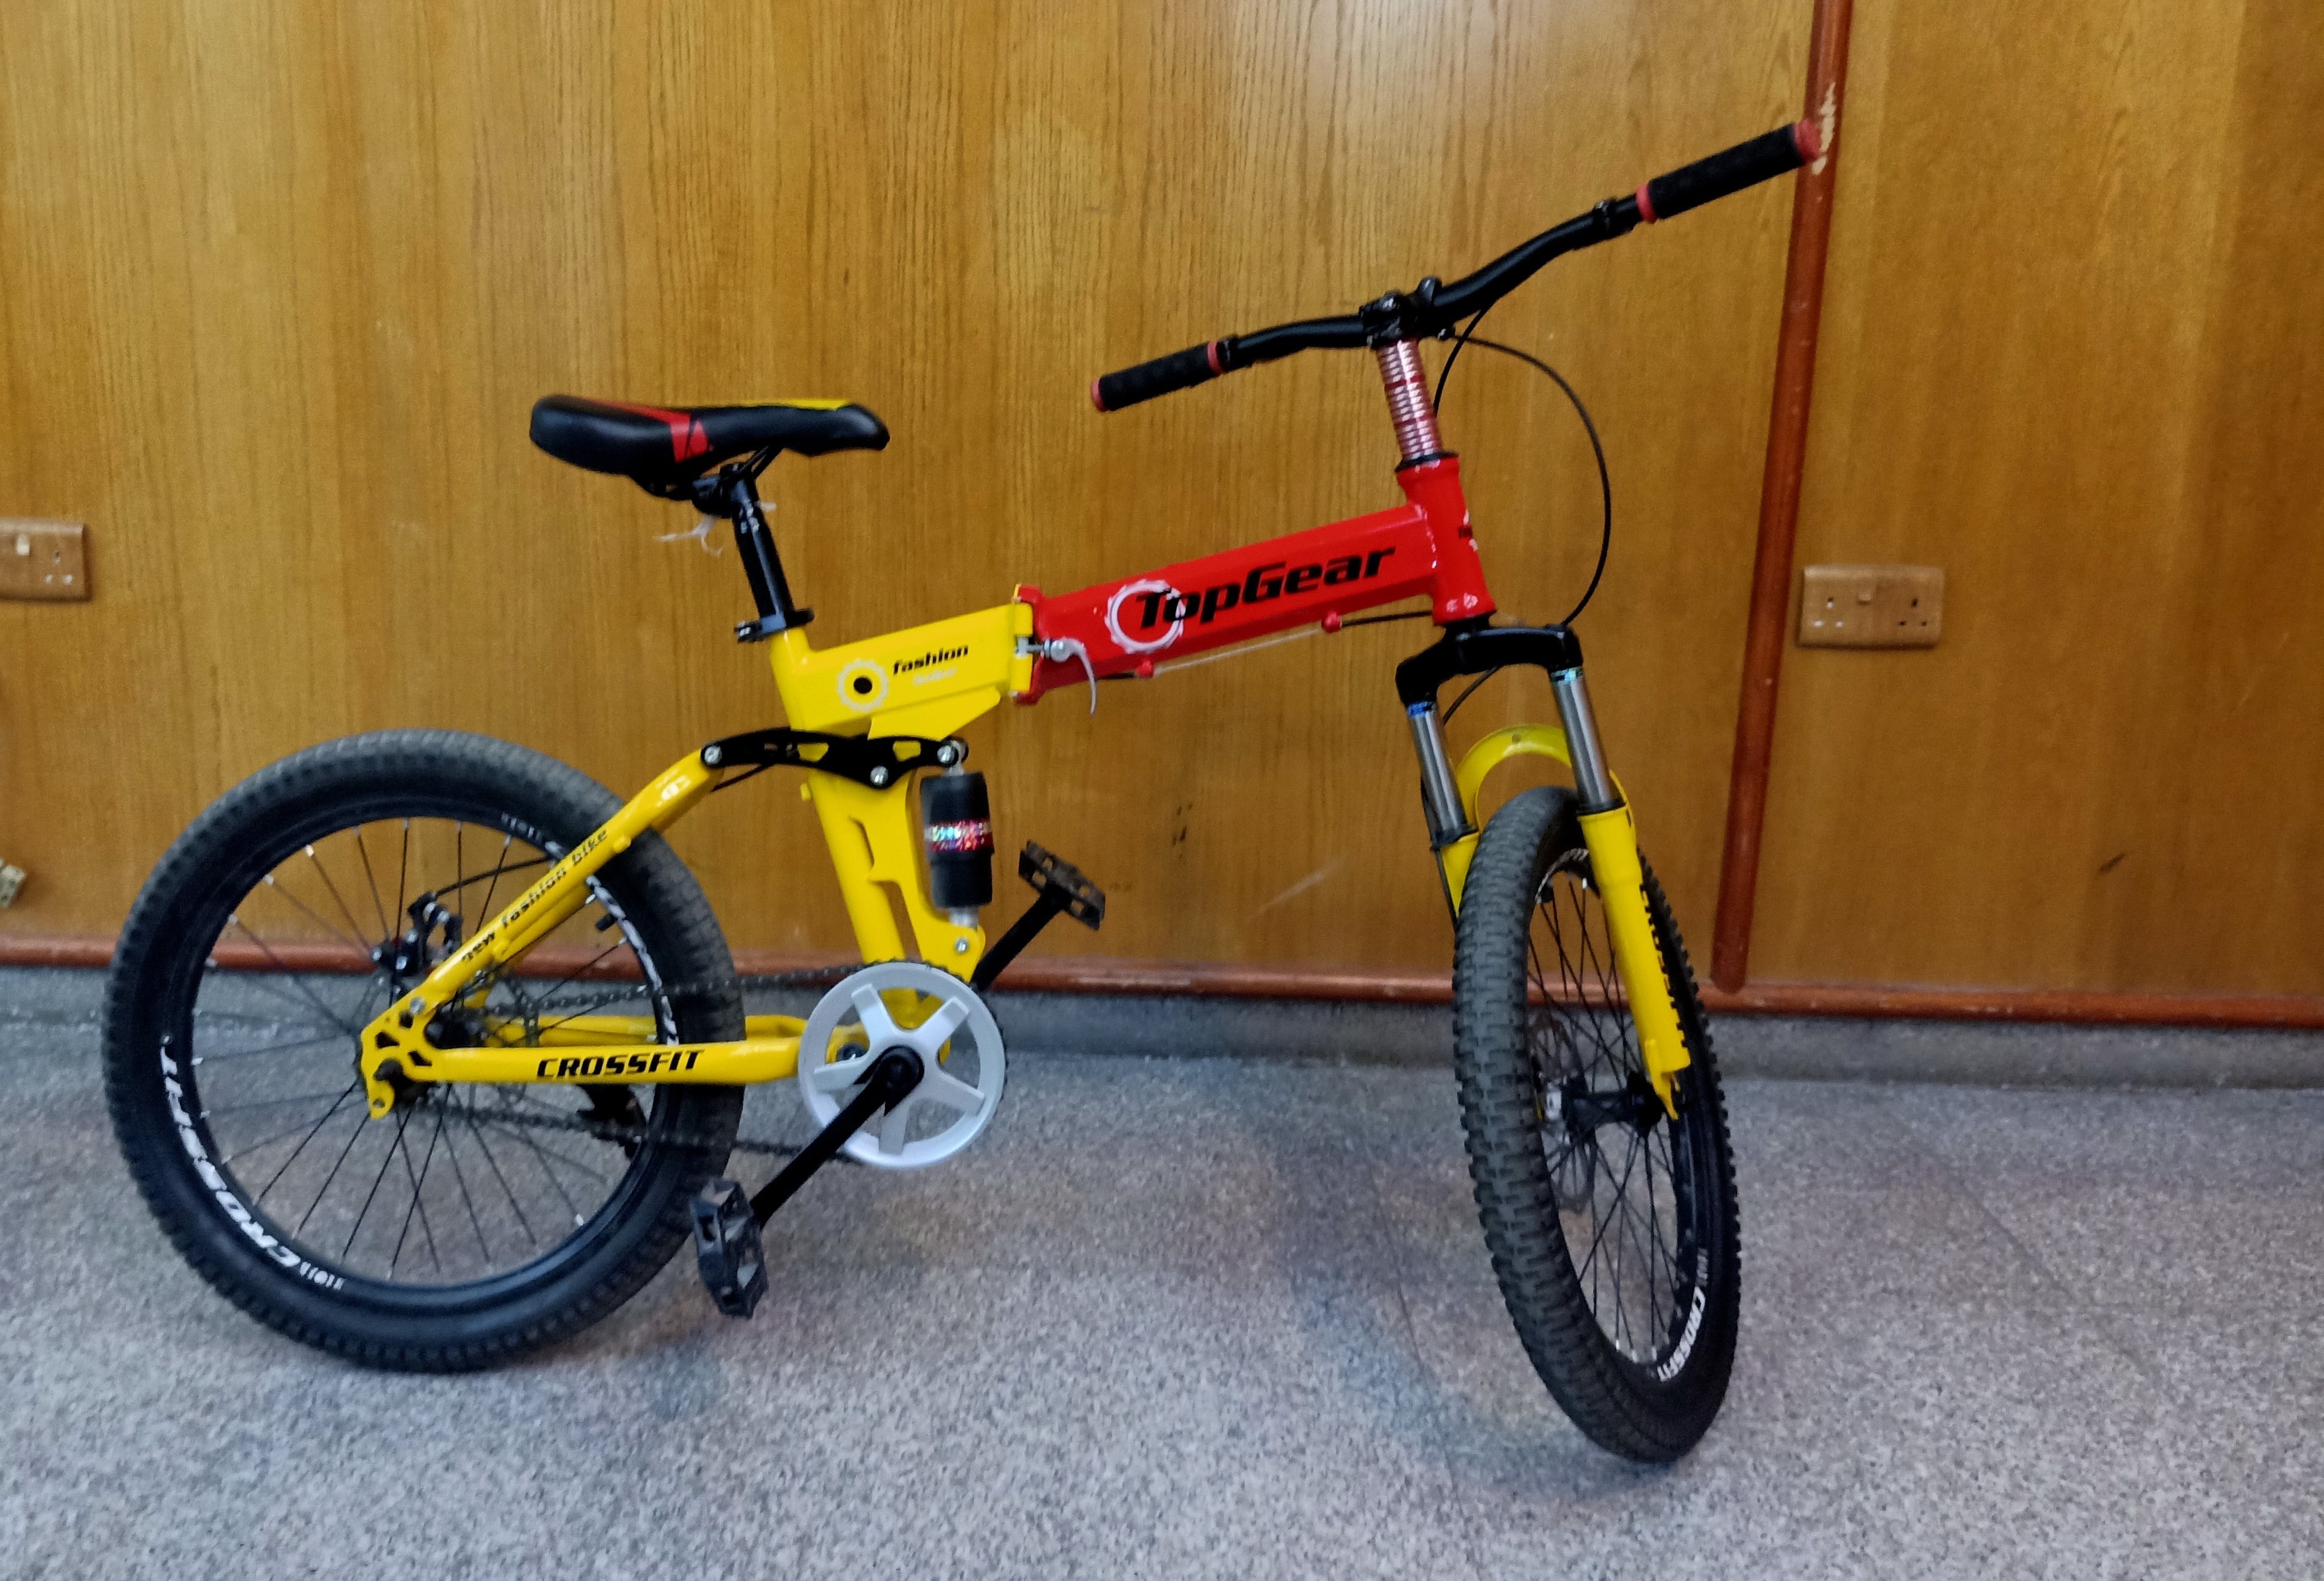 Teens Bicycle for Sale - Rarely used for 8-10 Boys